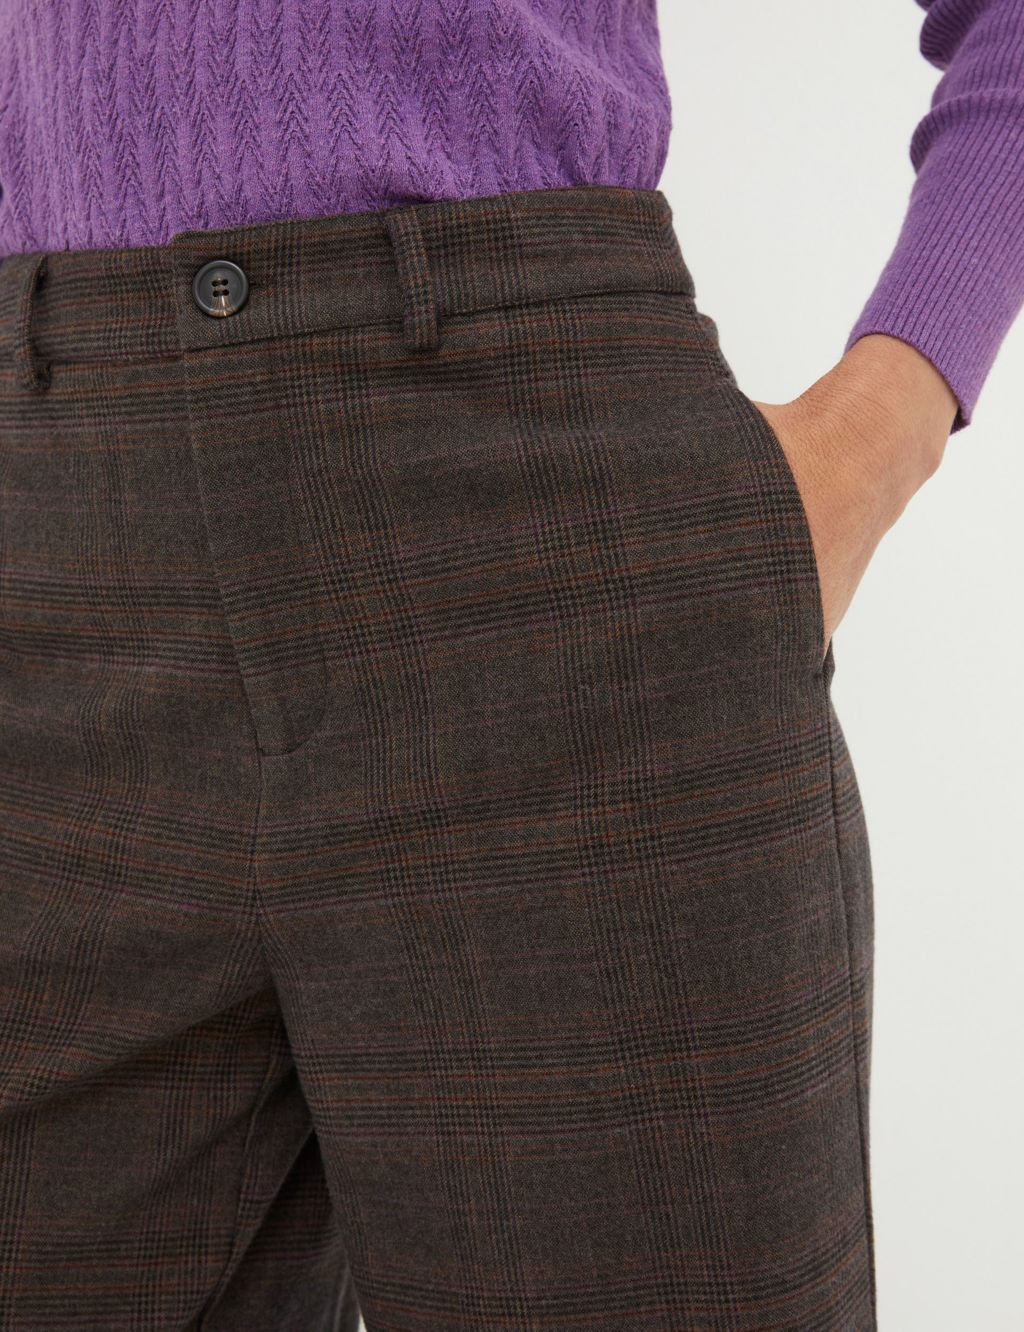 Checked Wide Leg Trousers image 4